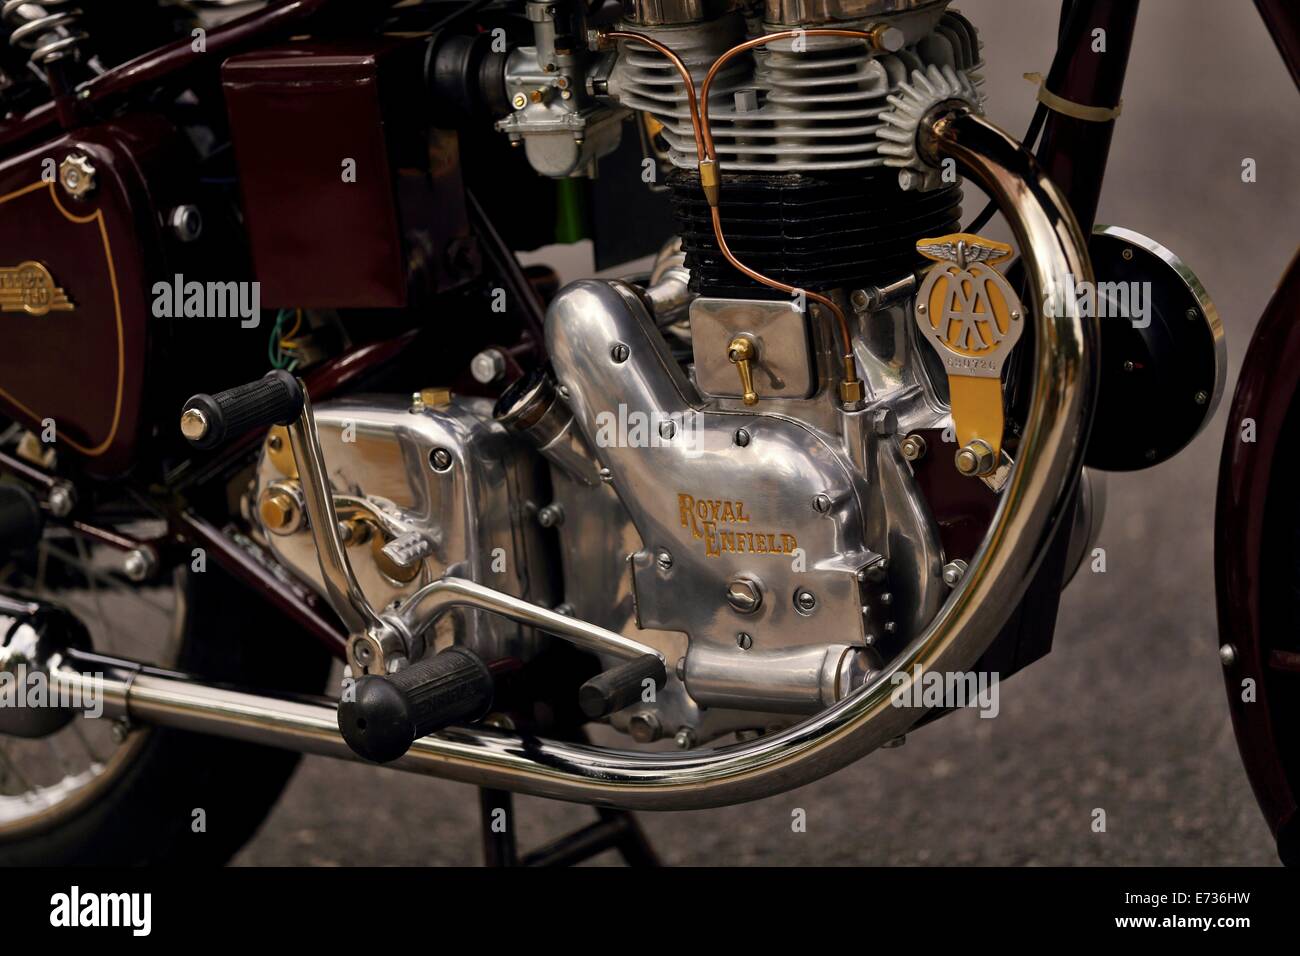 Royal Enfield bullet 350 G2 1954 engine made in England motorcycle Stock Photo